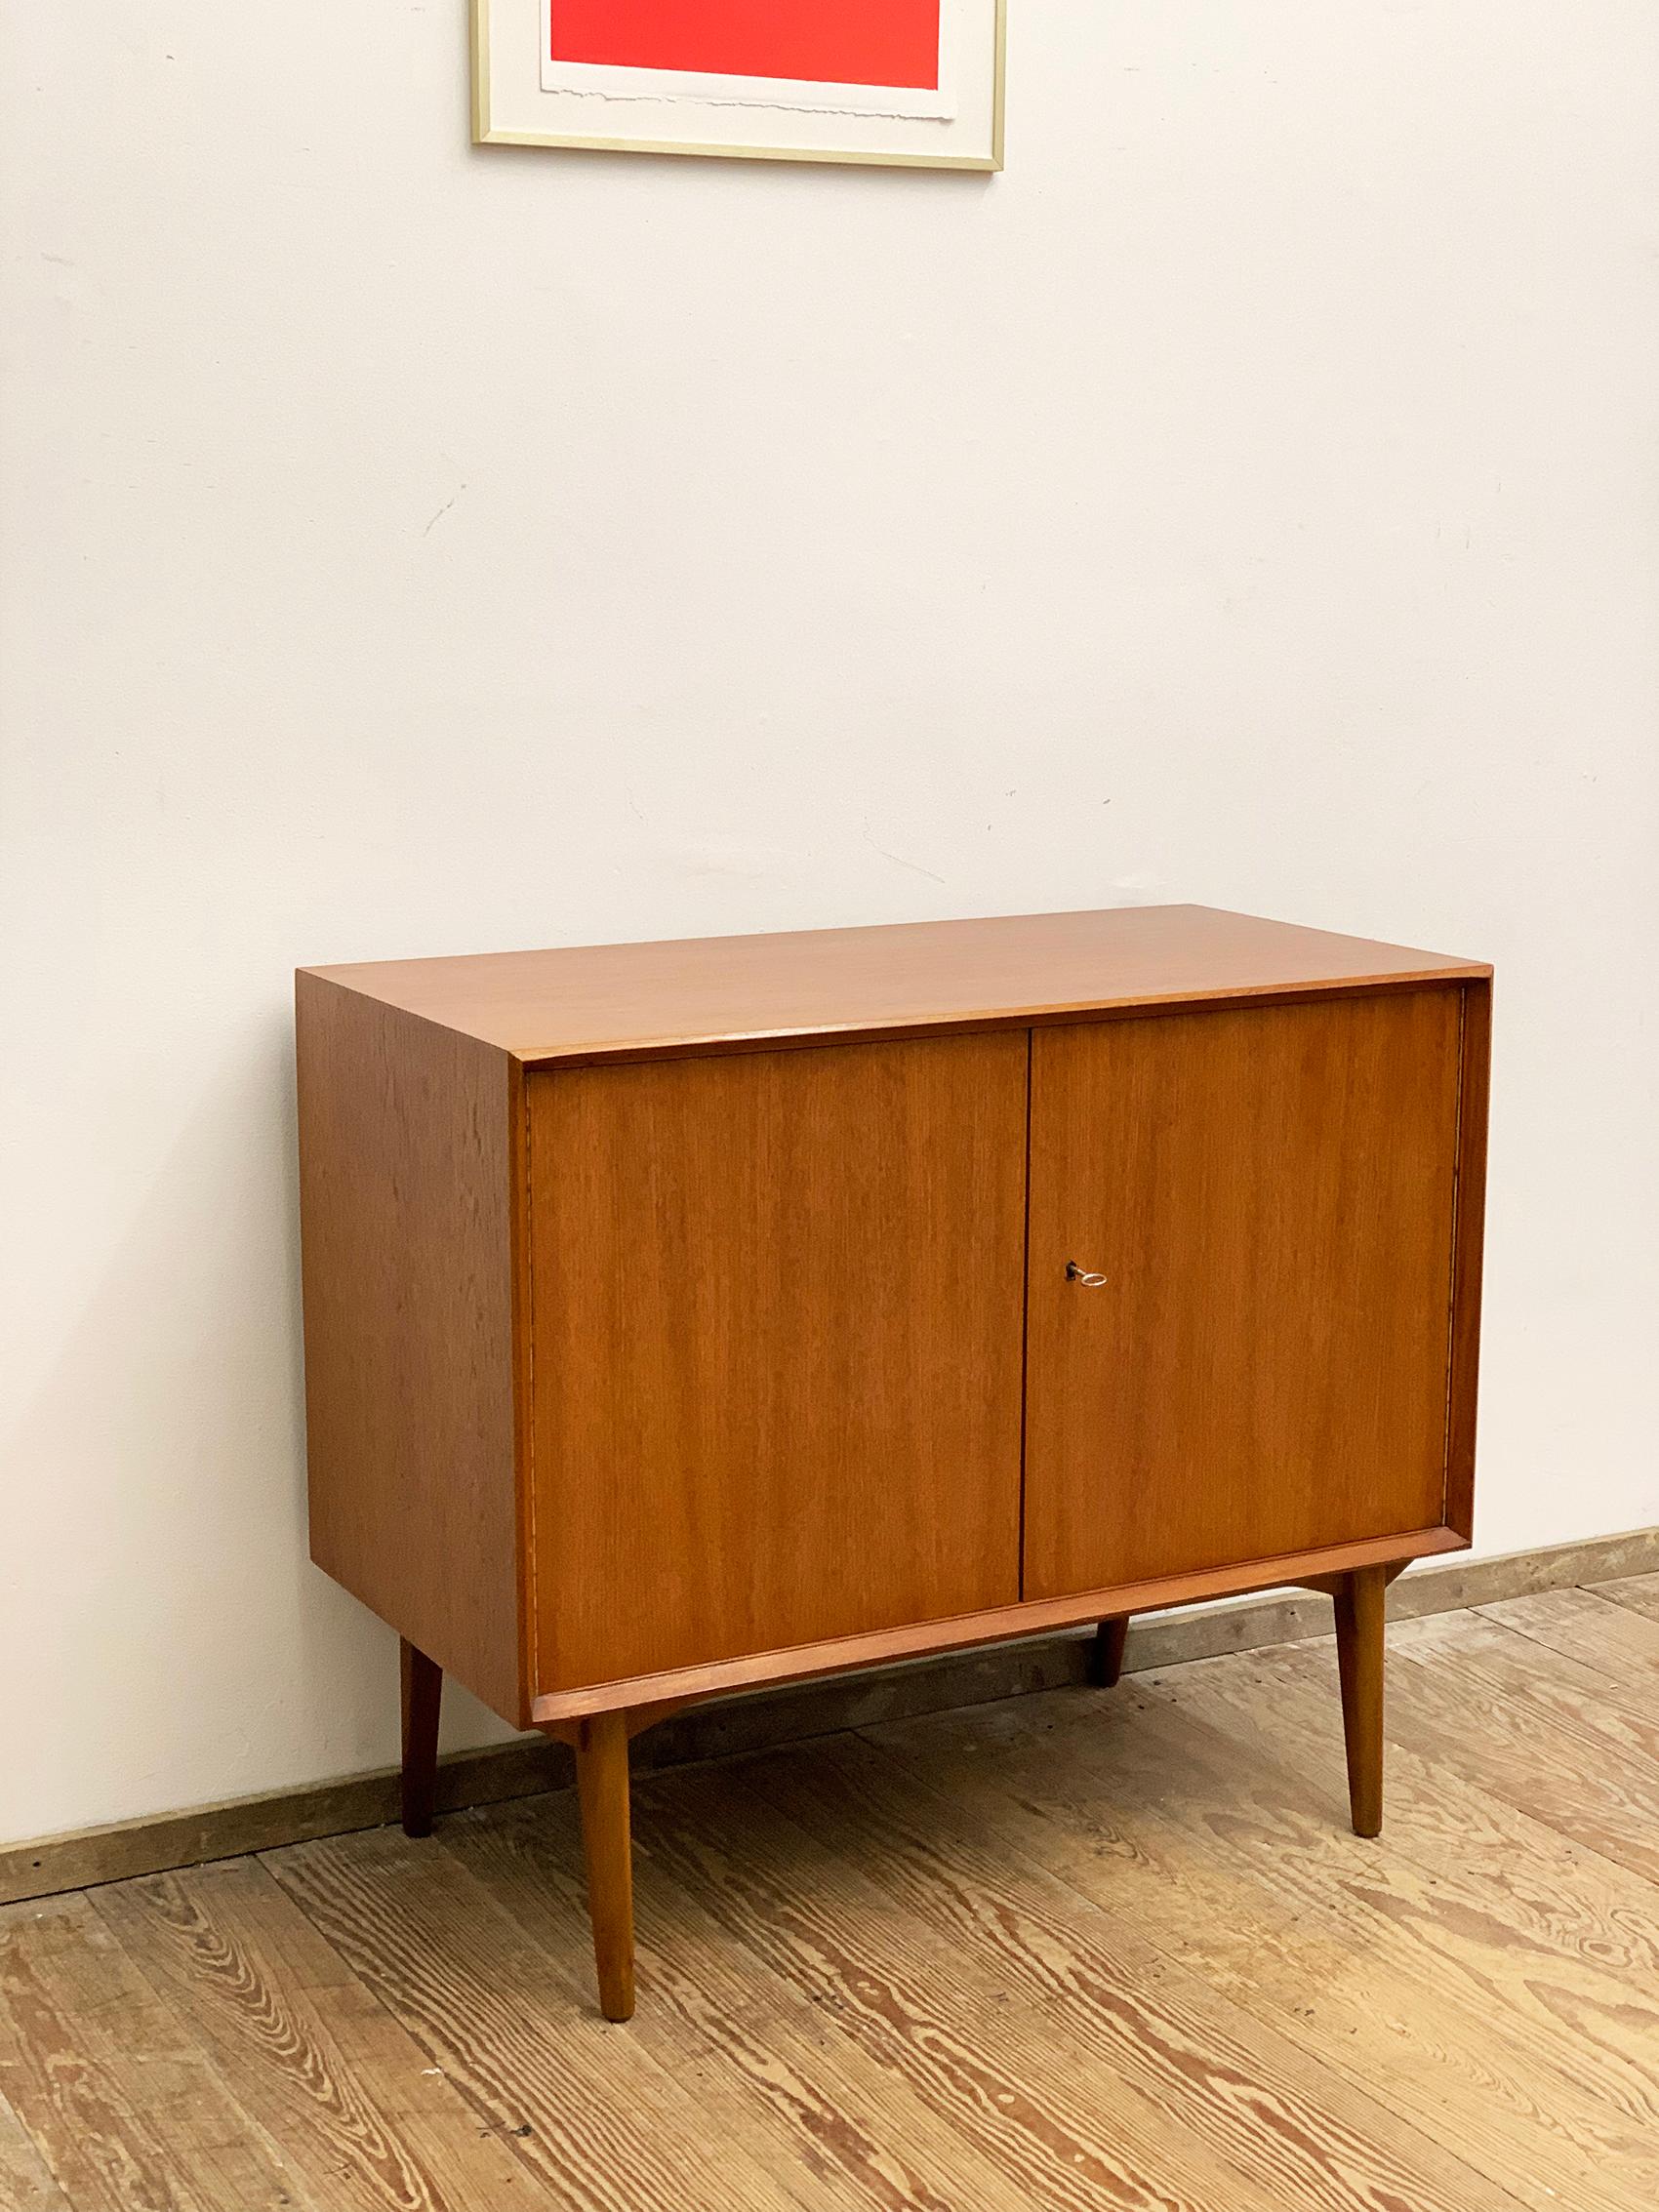 Small Mid-Century Sideboard in Teak by Rex Raab for Wilhelm Renz, Germany, 1960s In Good Condition For Sale In München, Bavaria